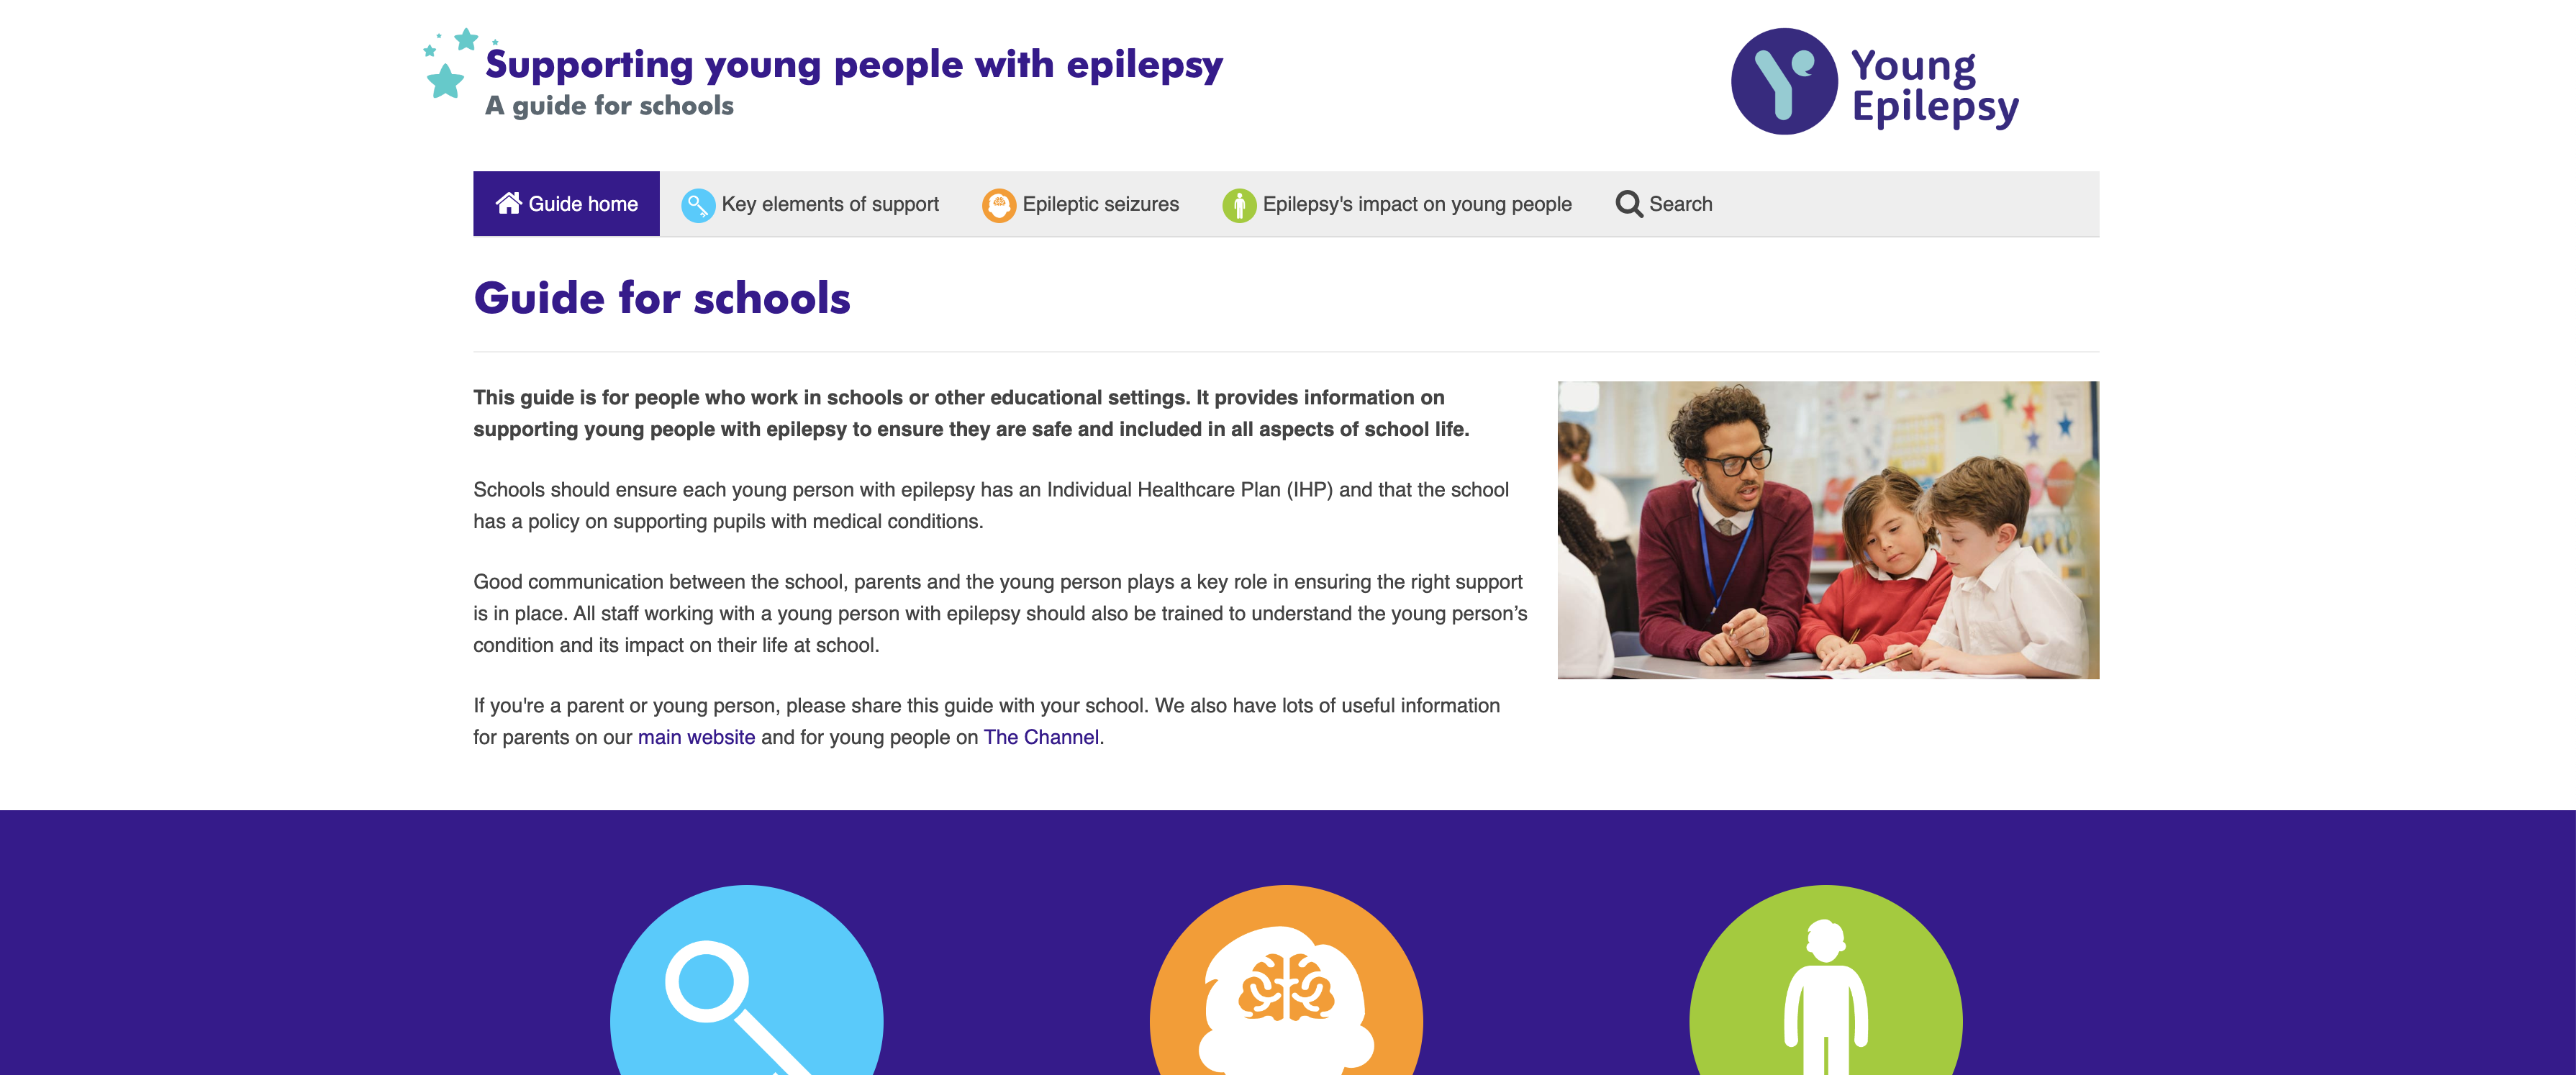 Supporting Young People with Epilepsy: Guide for schools website